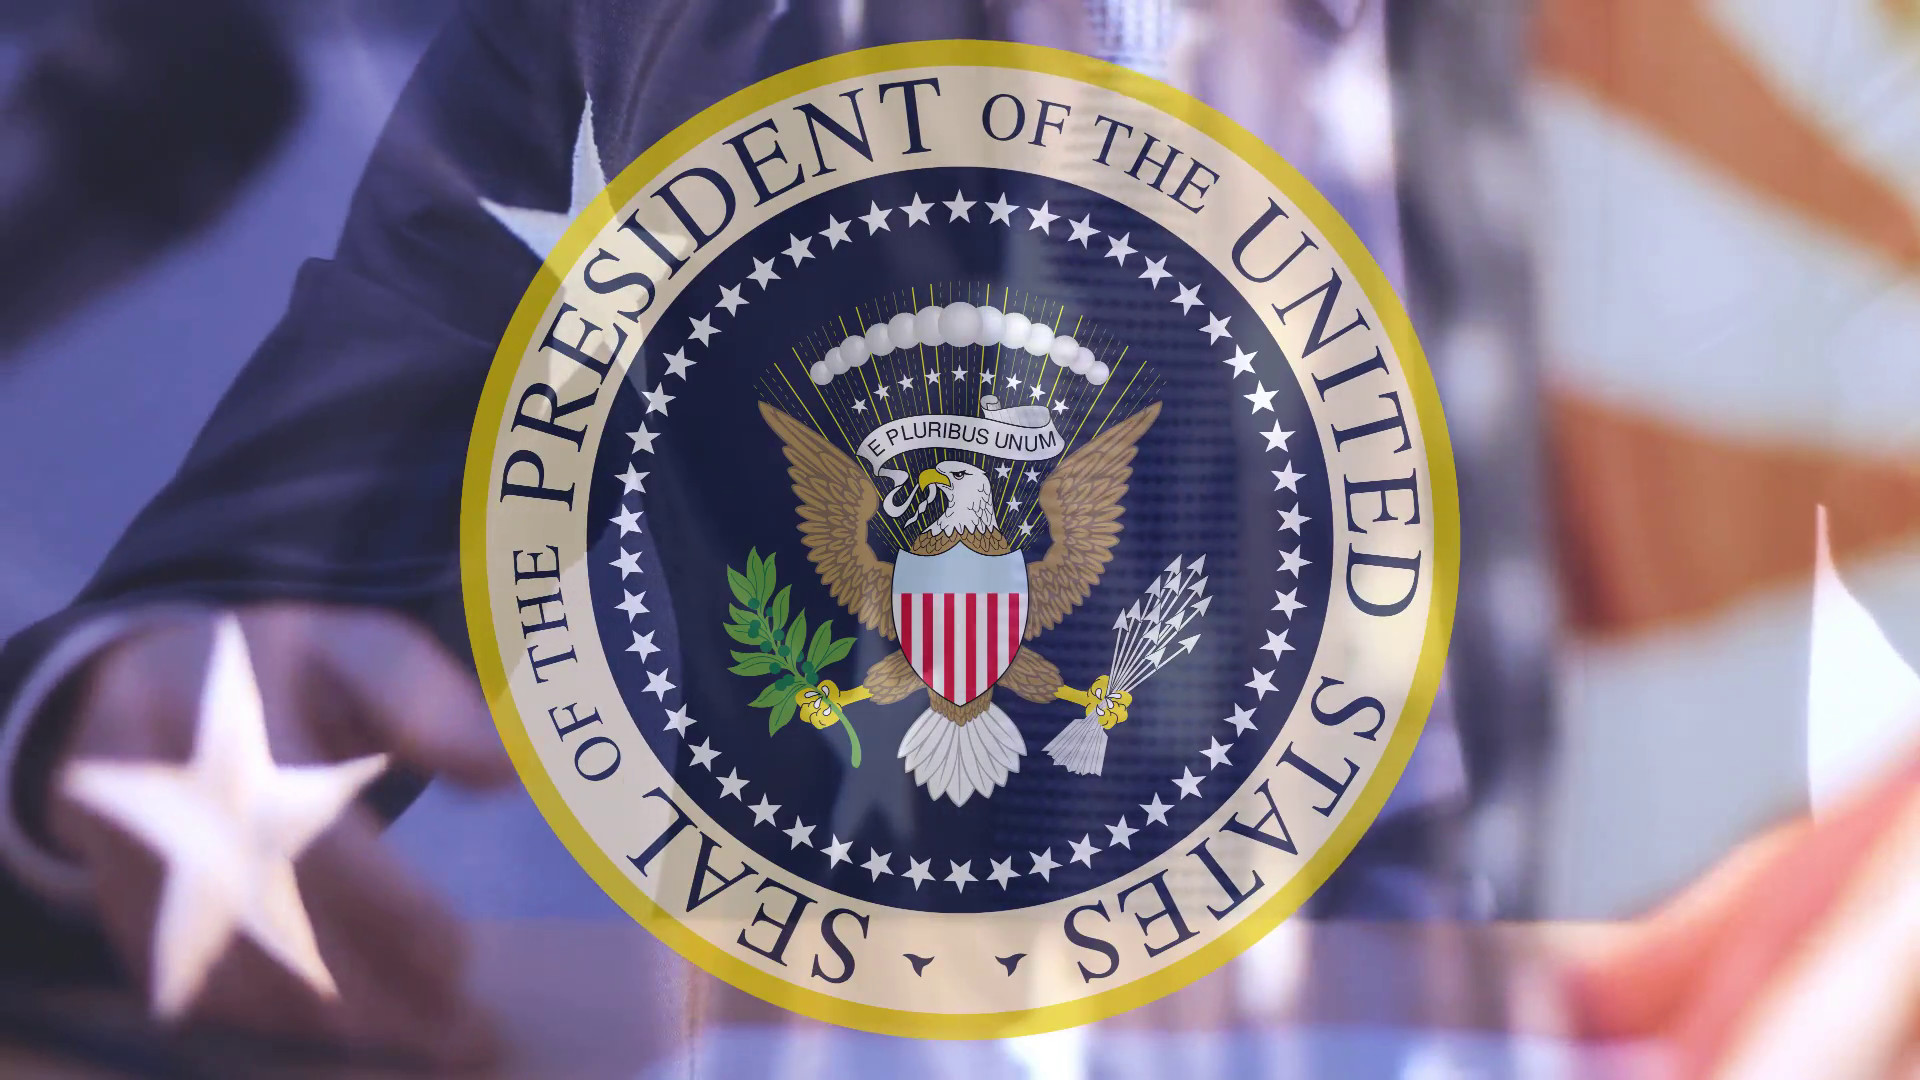 Seal Of The President Of The United States Wallpapers